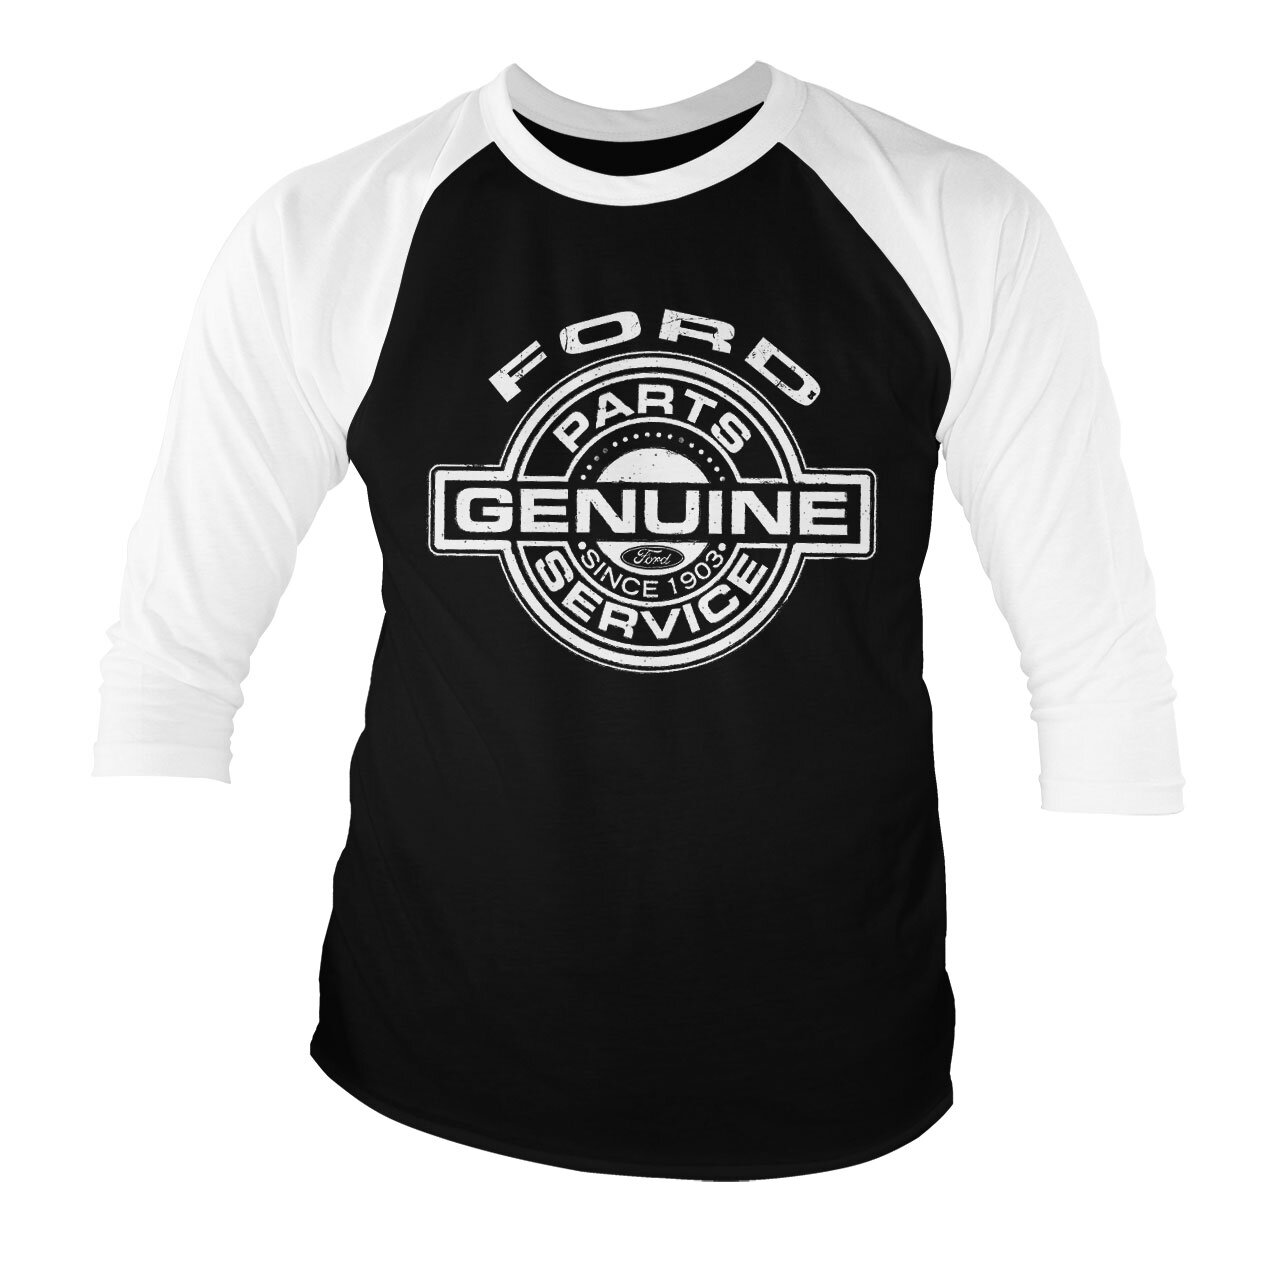 Ford - Genuine Parts And Service Baseball 3/4 Sleeve Tee